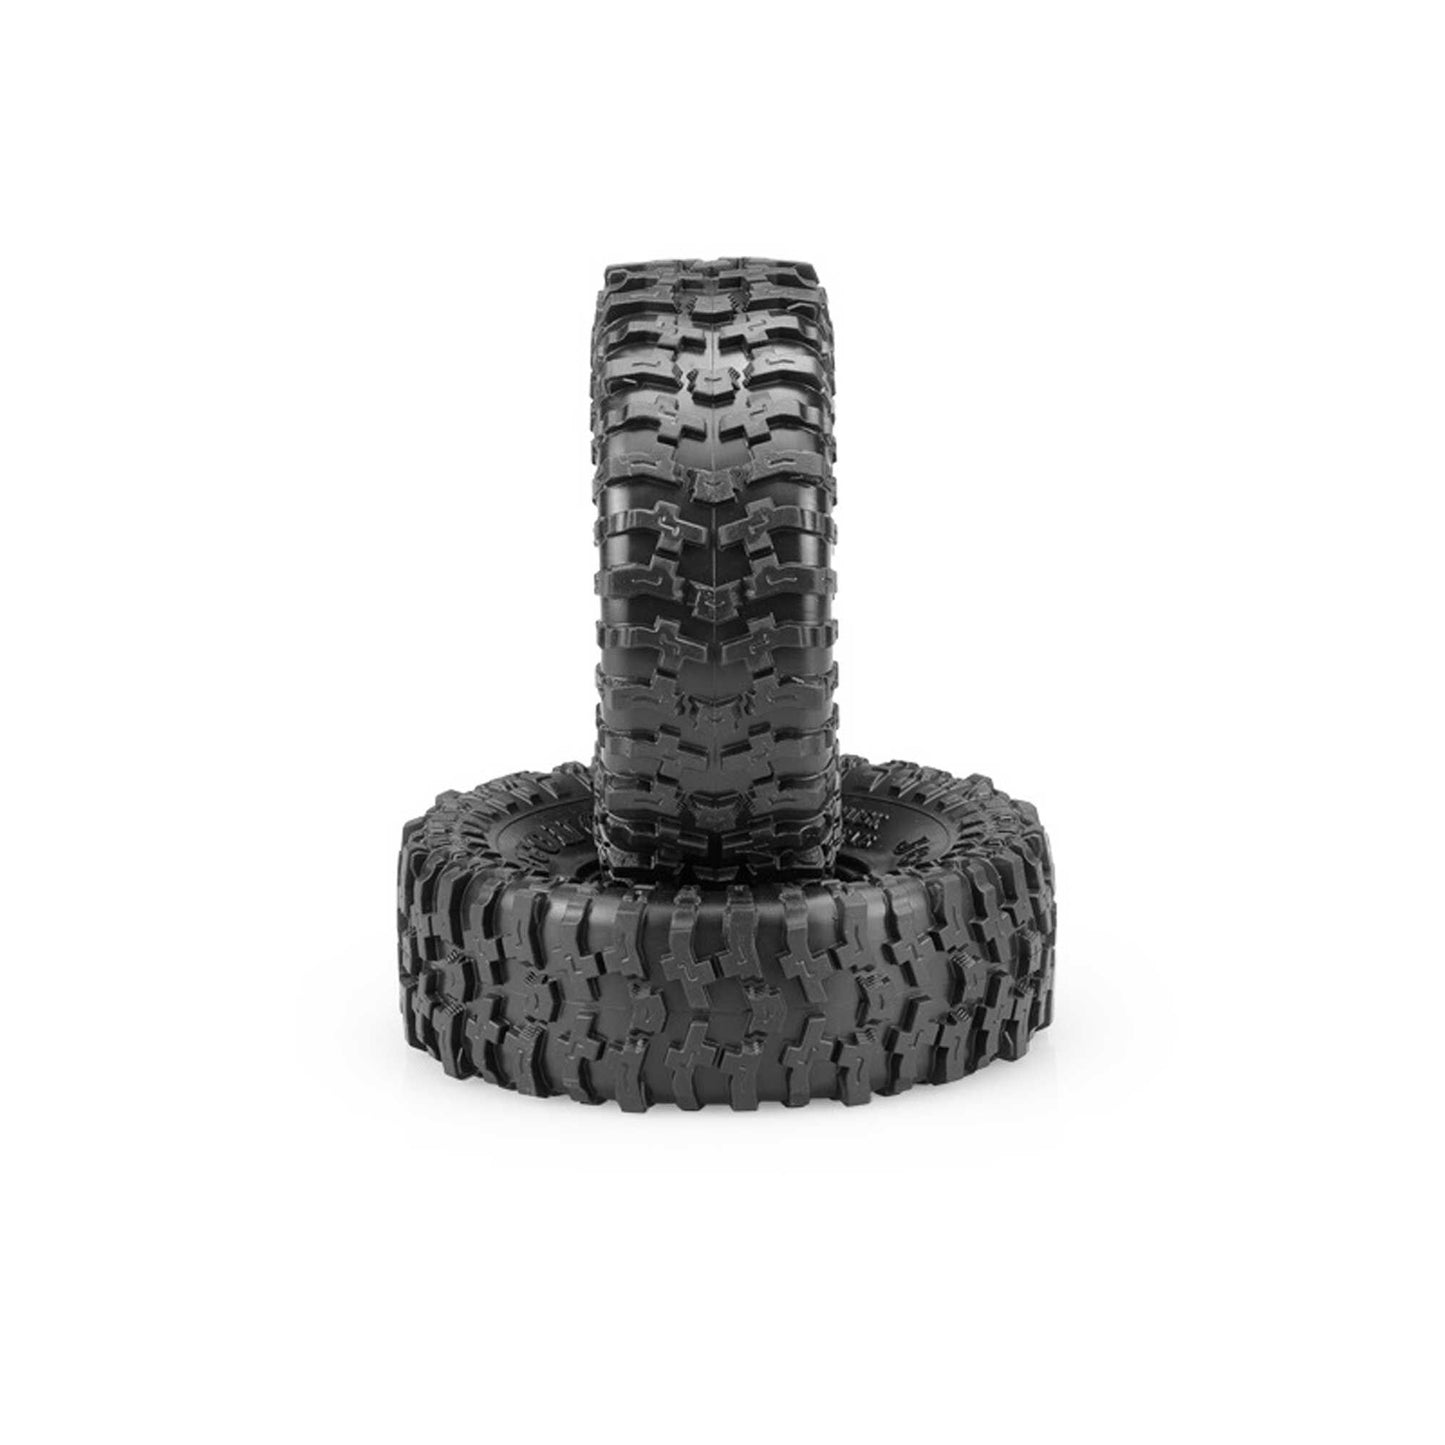 Tusk - Performance Scaler Crawler Tire, Green Compound, 4.75in. OD, for 1.9" Wheel